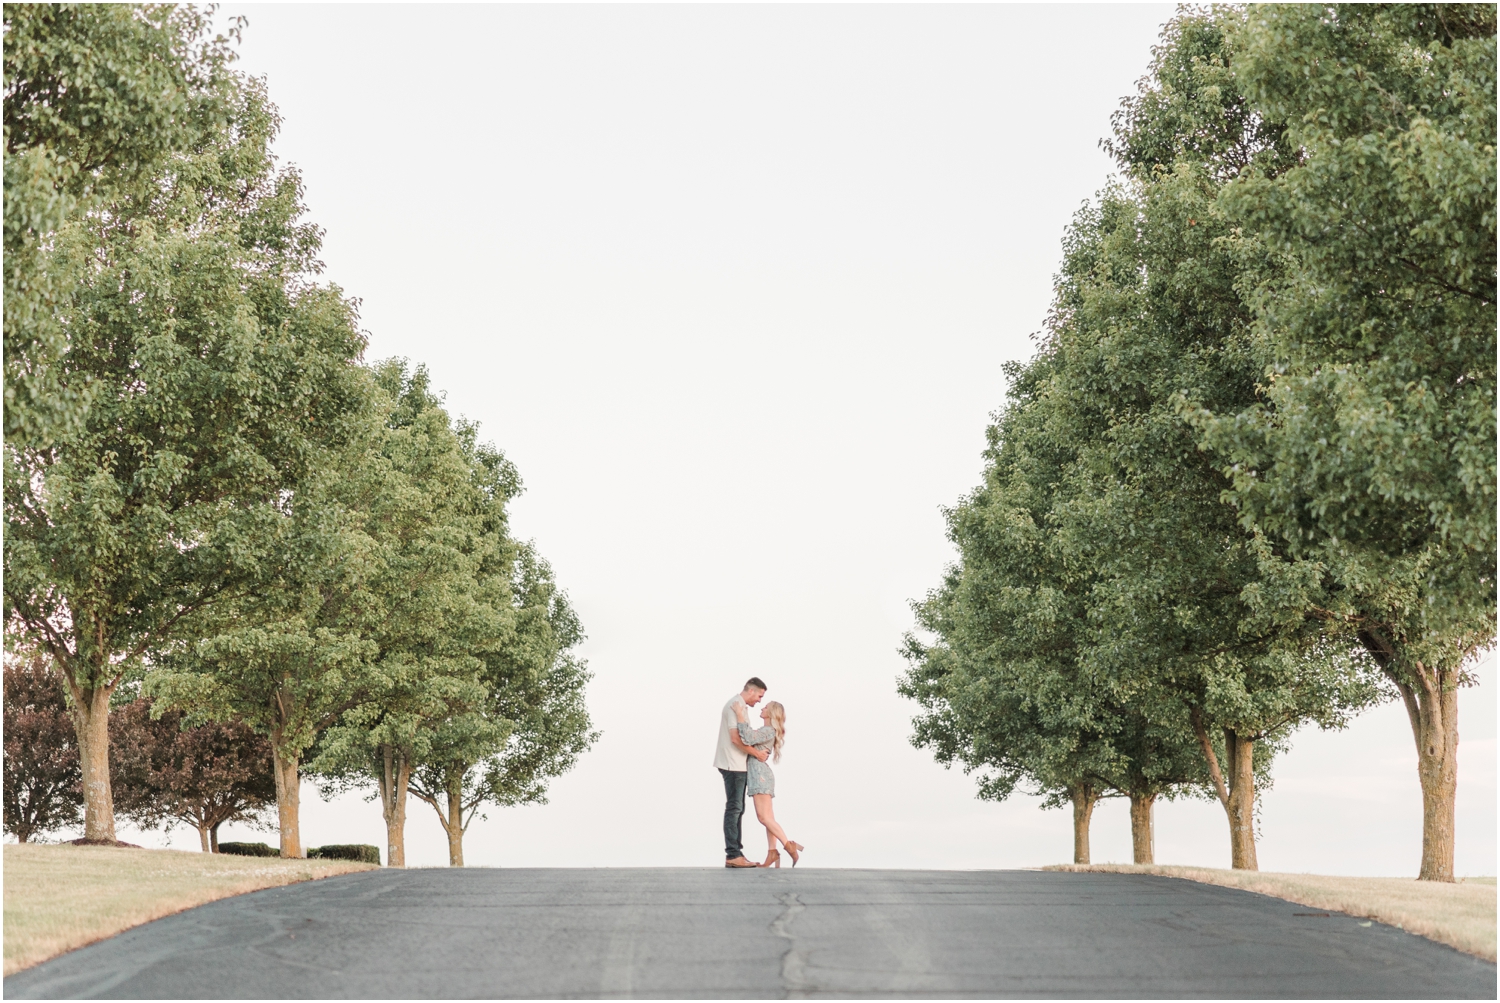 Engagement Photos Ideas What To Wear Couple Poses Downtown Indiana Wedding Photographer Rose Courts Photography